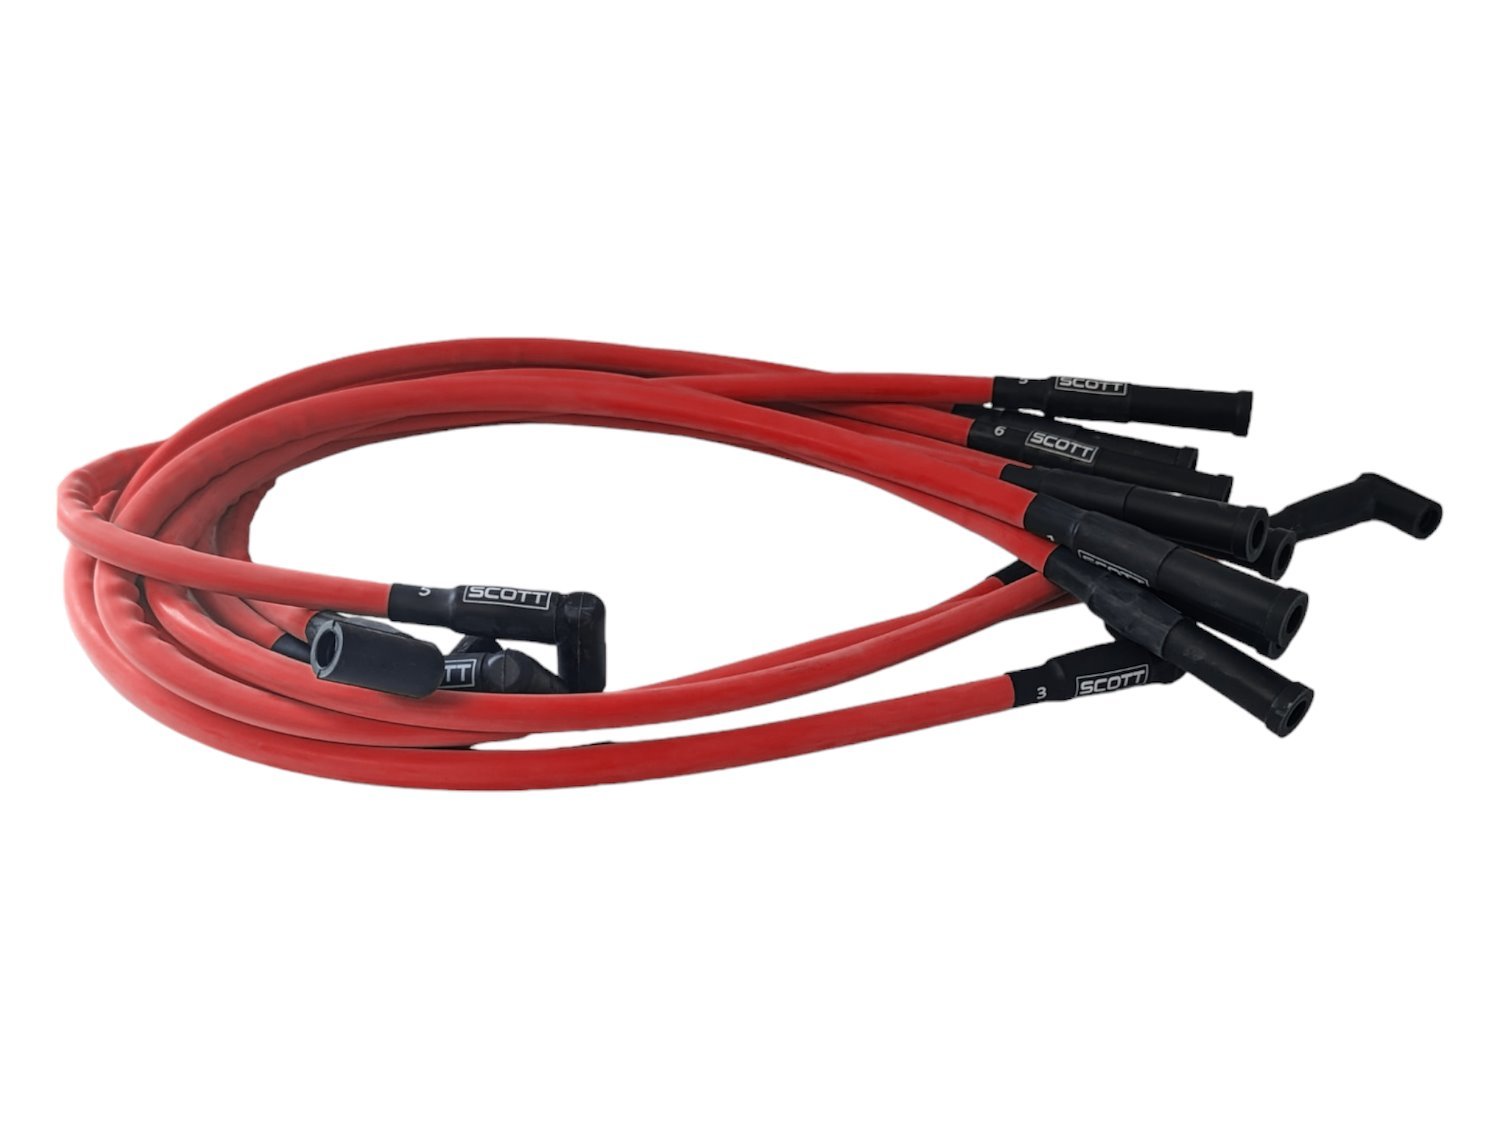 SPW300-CH-421-2 Super Mag Fiberglass-Oversleeved Spark Plug Wire Set for Small Block Chevy, Over Valve Cover [Red]